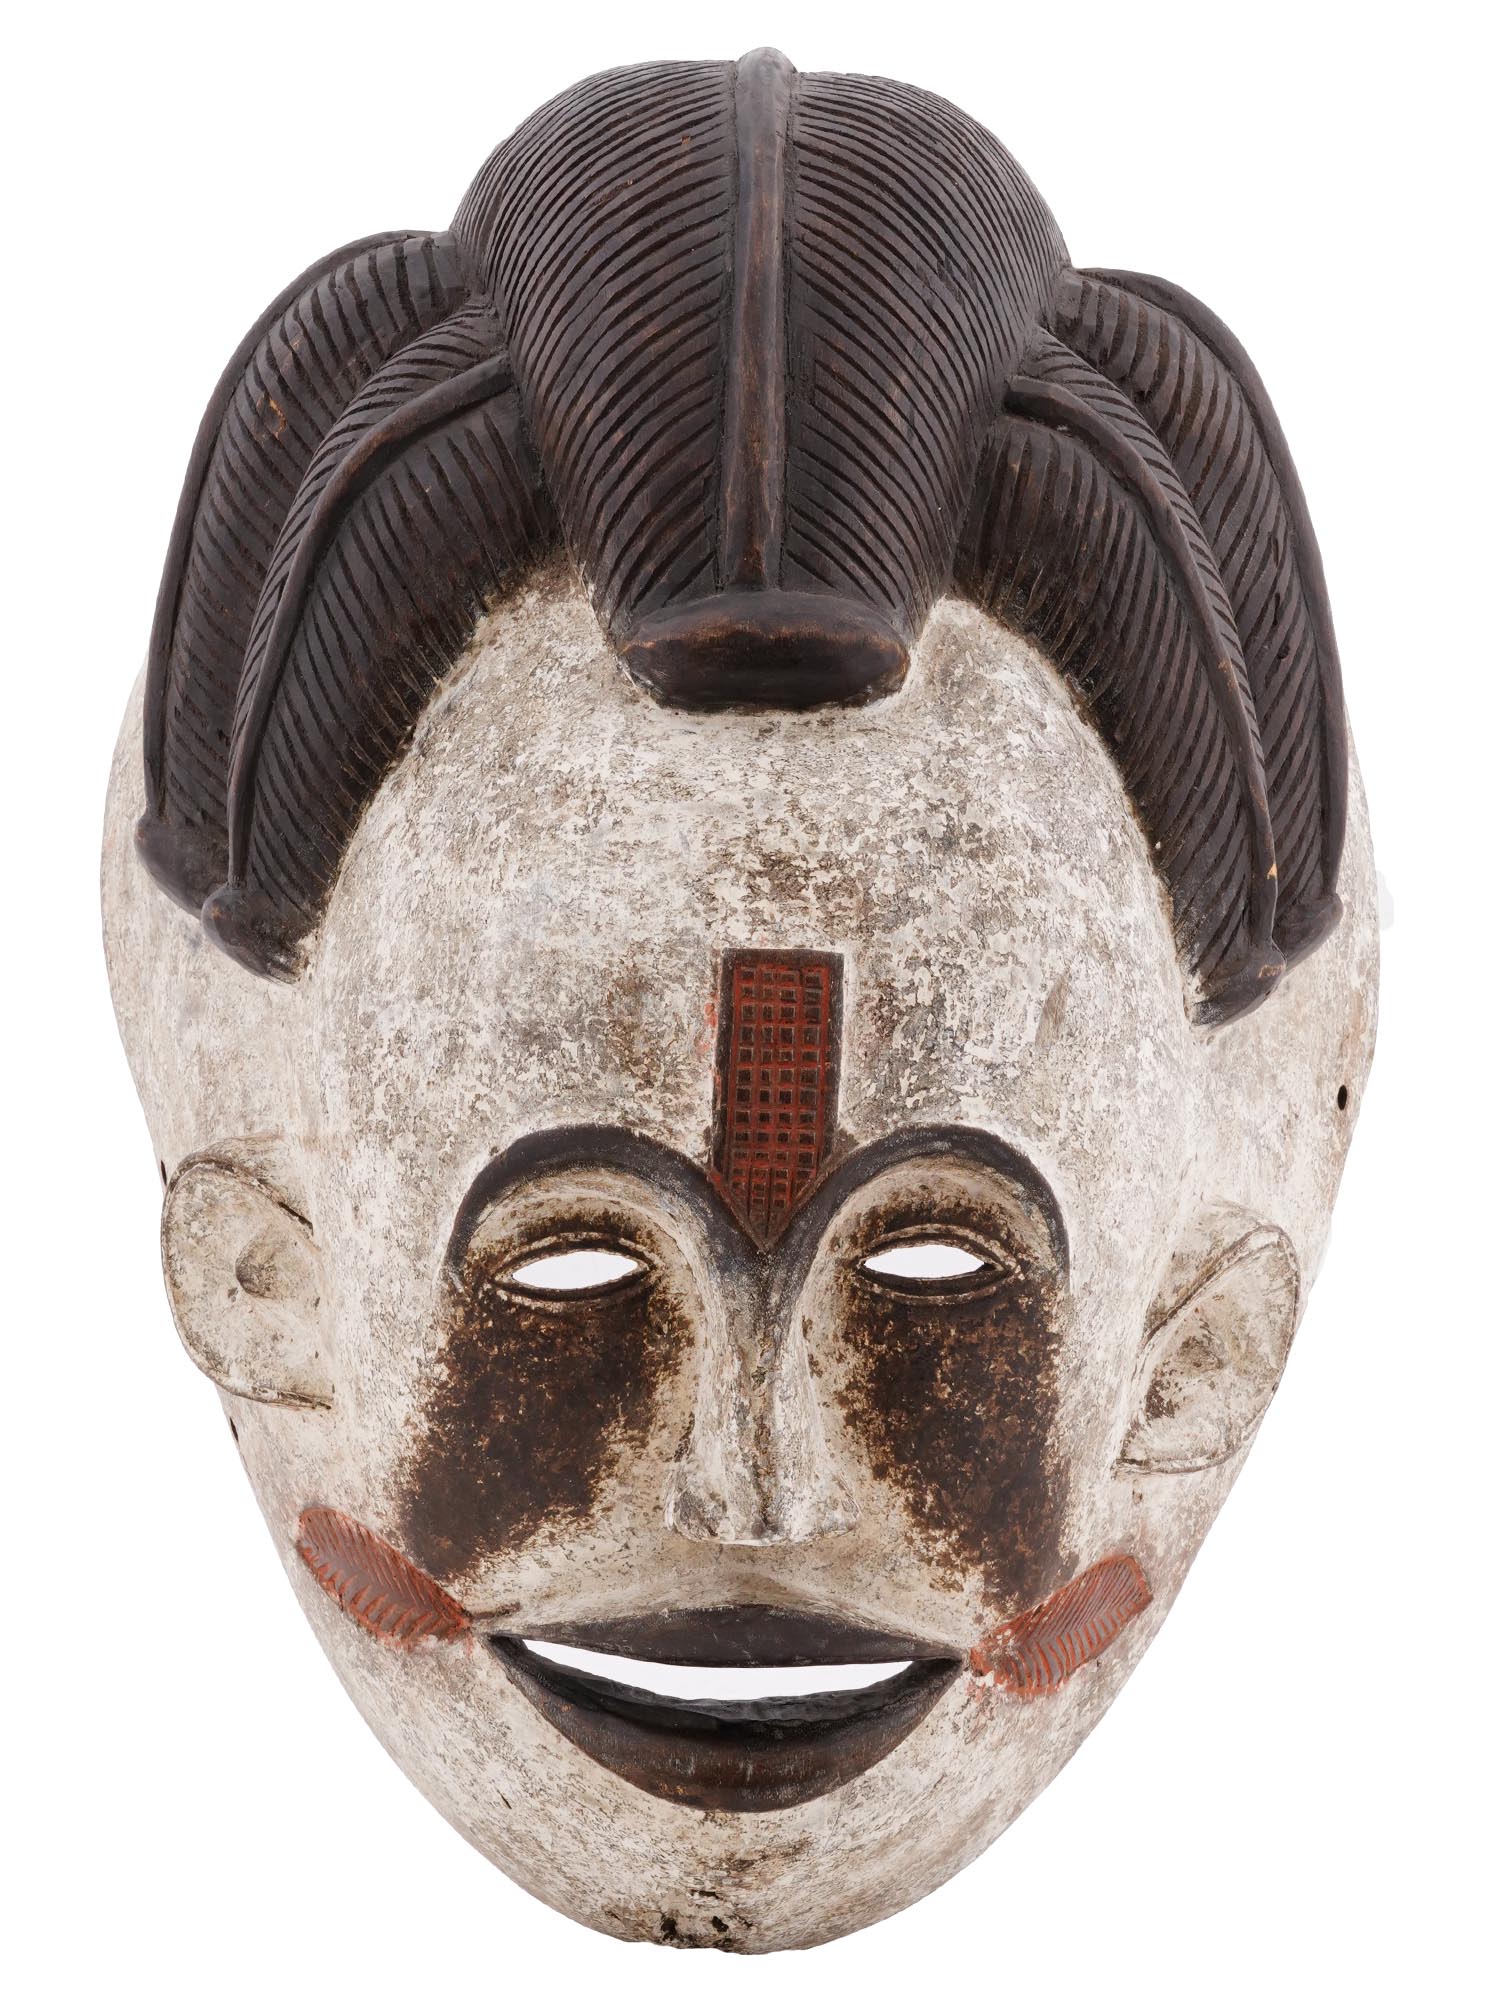 ANTIQUE AFRICAN GABON CARVED WOOD VUVI TRIBE MASK PIC-0